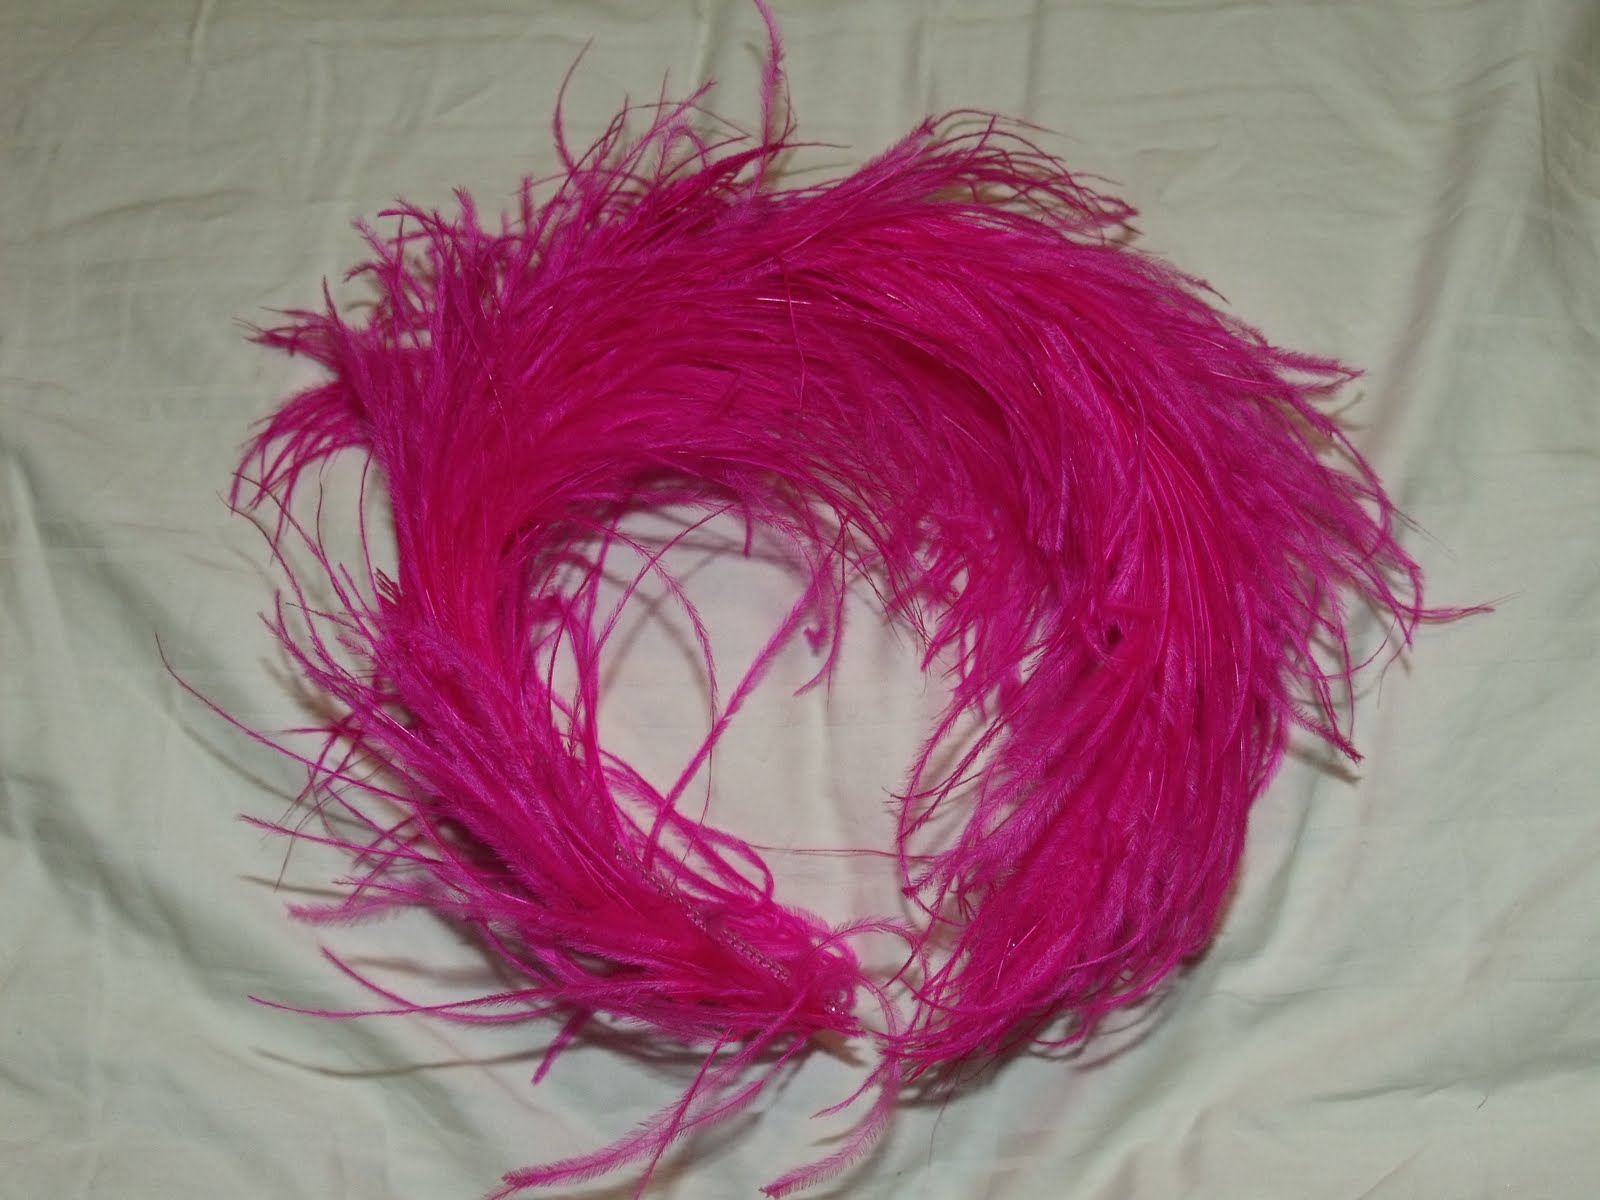 Accessories 2 Go!: Hot pink fluffy feathred headband (SOLD)